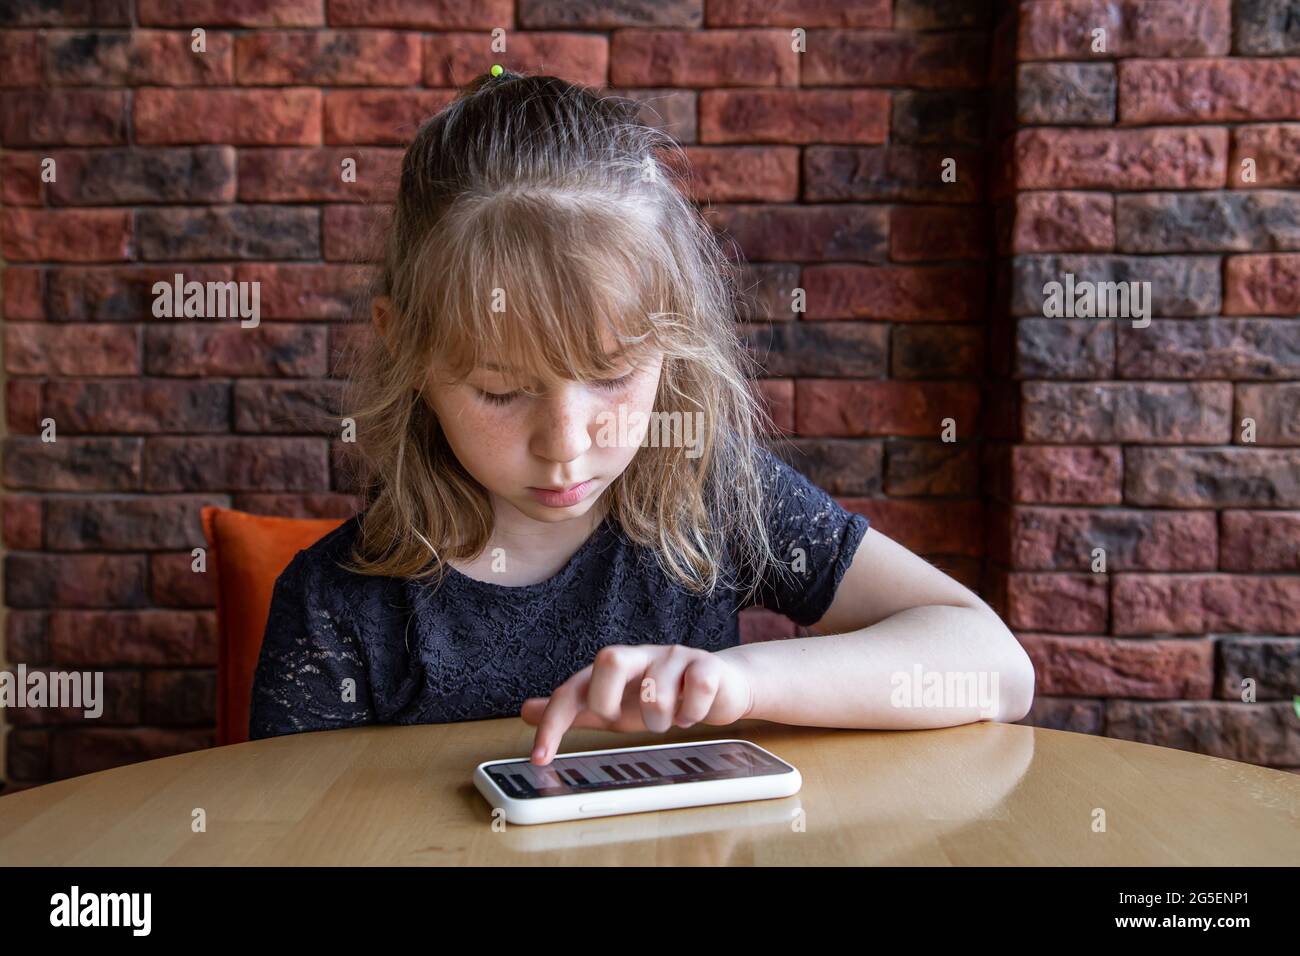 A little girl learns notes in a playful way, with the help of a piano on her phone. Stock Photo